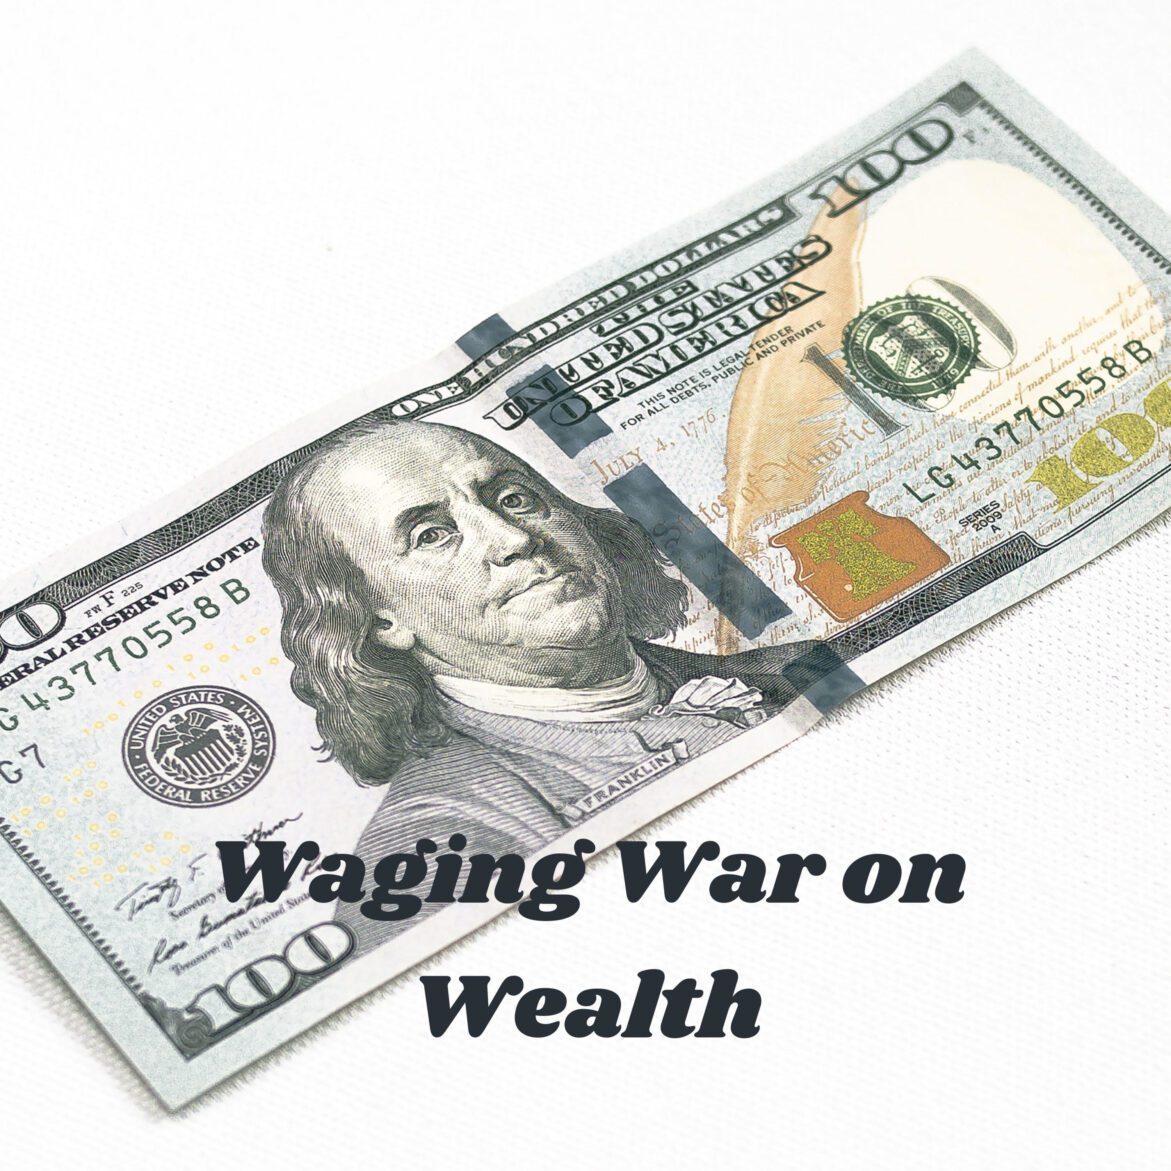 Black Podcasting - Waging War on Wealth - Leveraging Supplier Diversity Programs (Series) – 7 COVID-19 Commandments for Small, Minority and Women-owned Businesses (C-One)